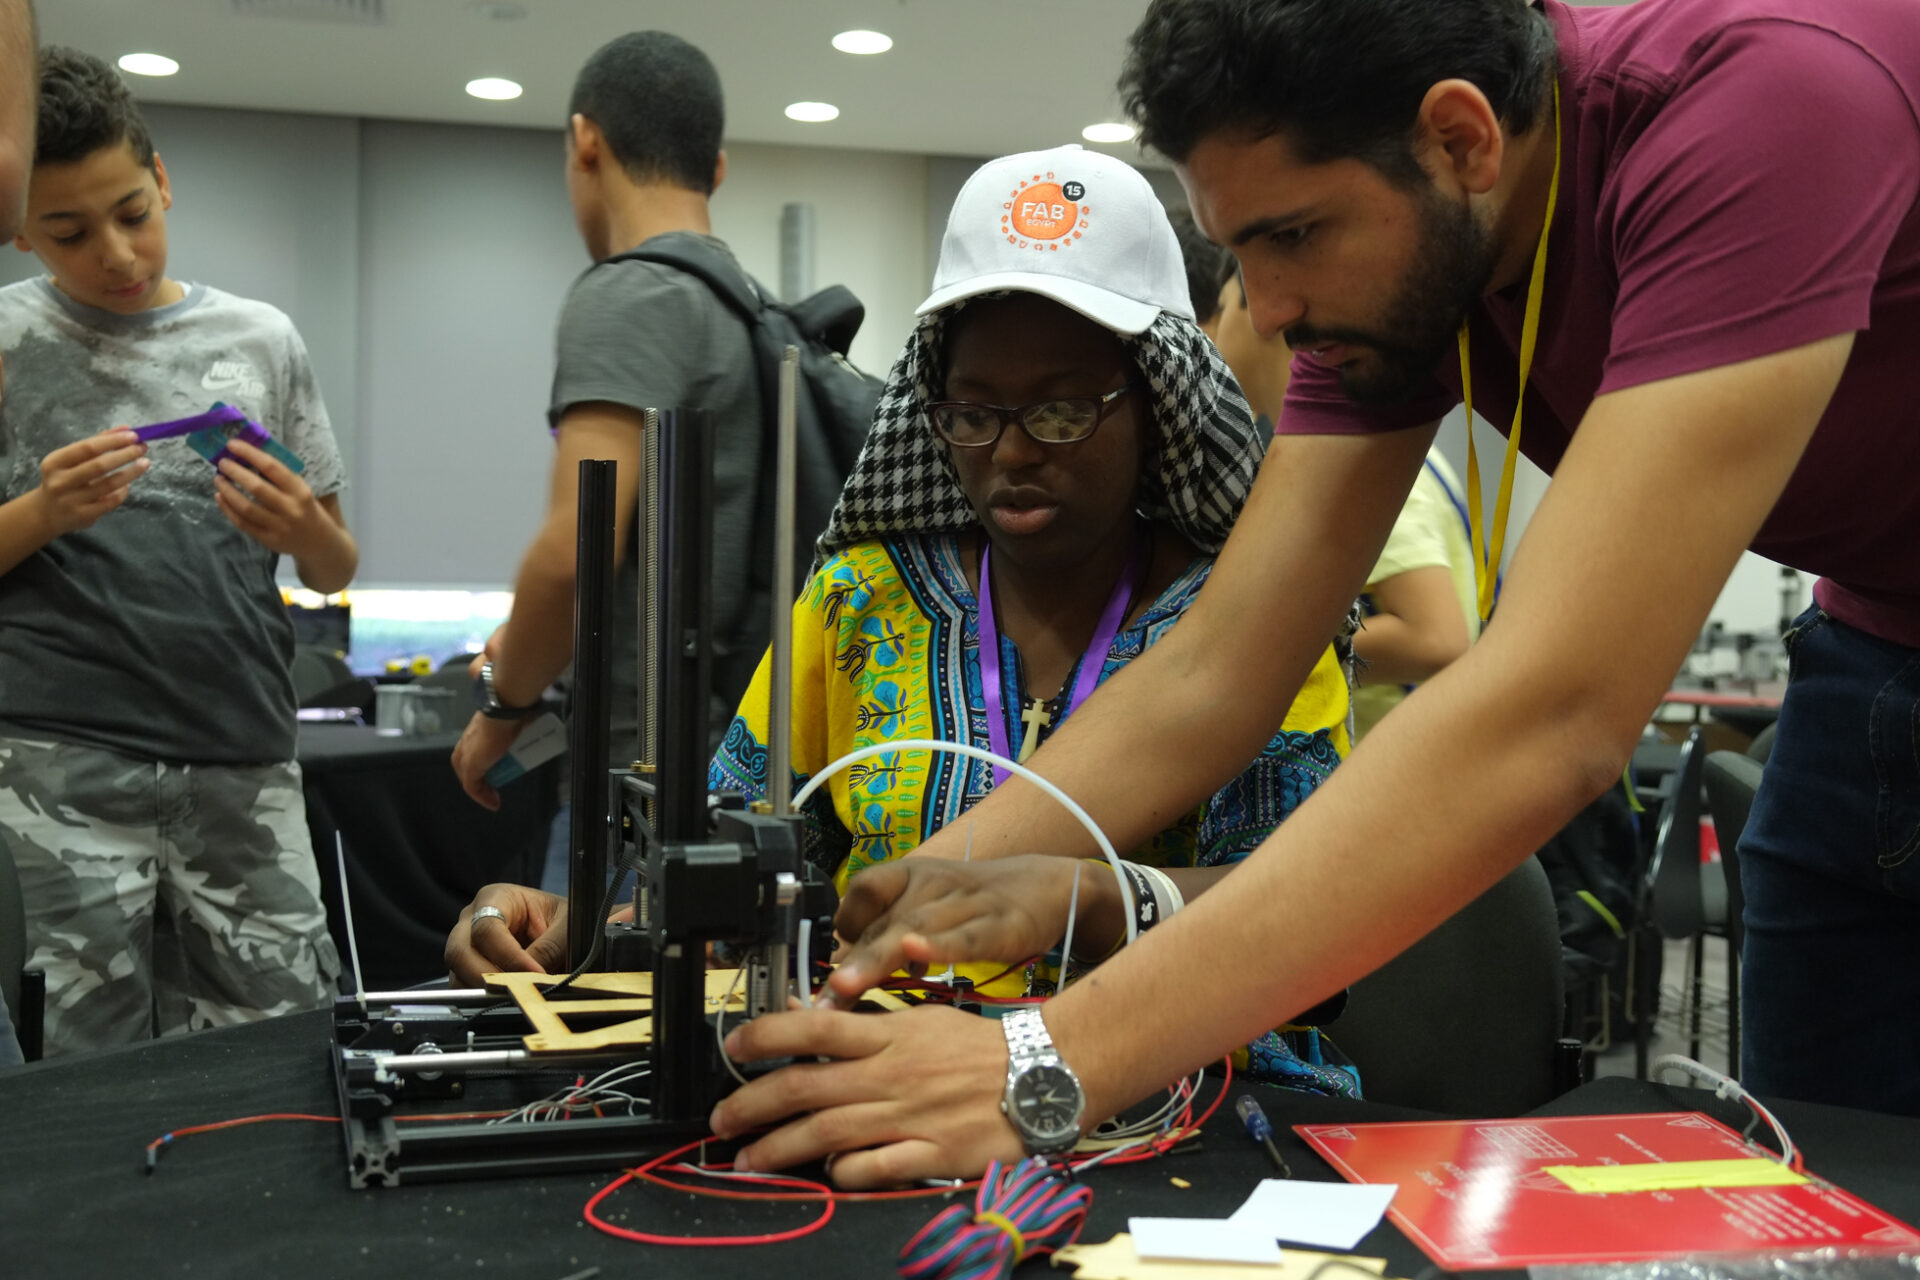 photograph of a group of people-of-colour makers building 3D printers. In the foreground a young man and a young woman wearing a FAB15 baseball cap are looking at the printer they are building together and have their hands on parts putting it together. There are wires, metal and plastic parts visible. In the background two other people are visible looking at the work going on in the room or at printed parts.